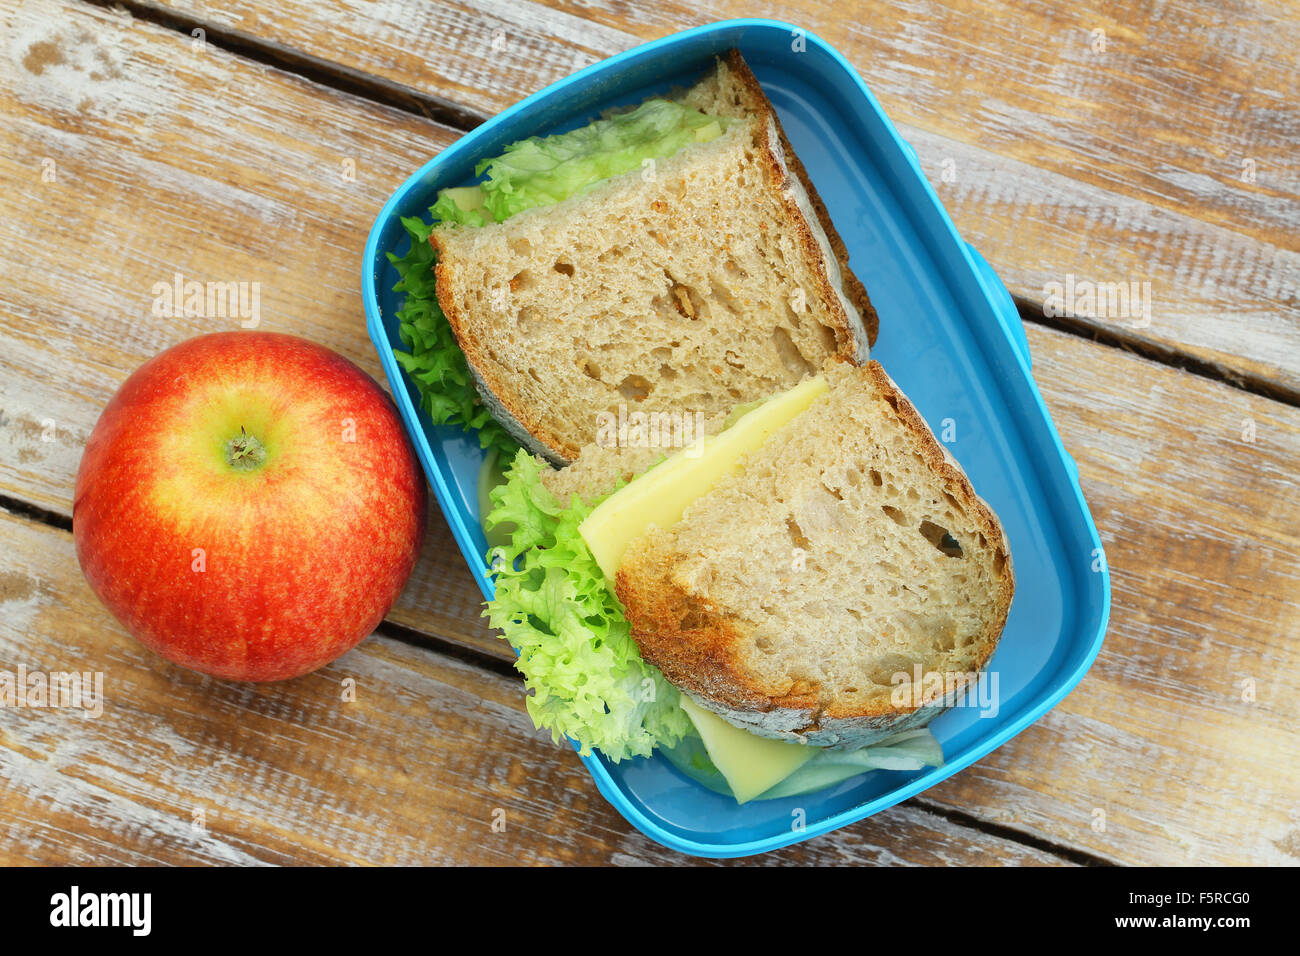 Healthy lunch box containing rustic bread sandwiches with cheese and lettuce and red apple Stock Photo